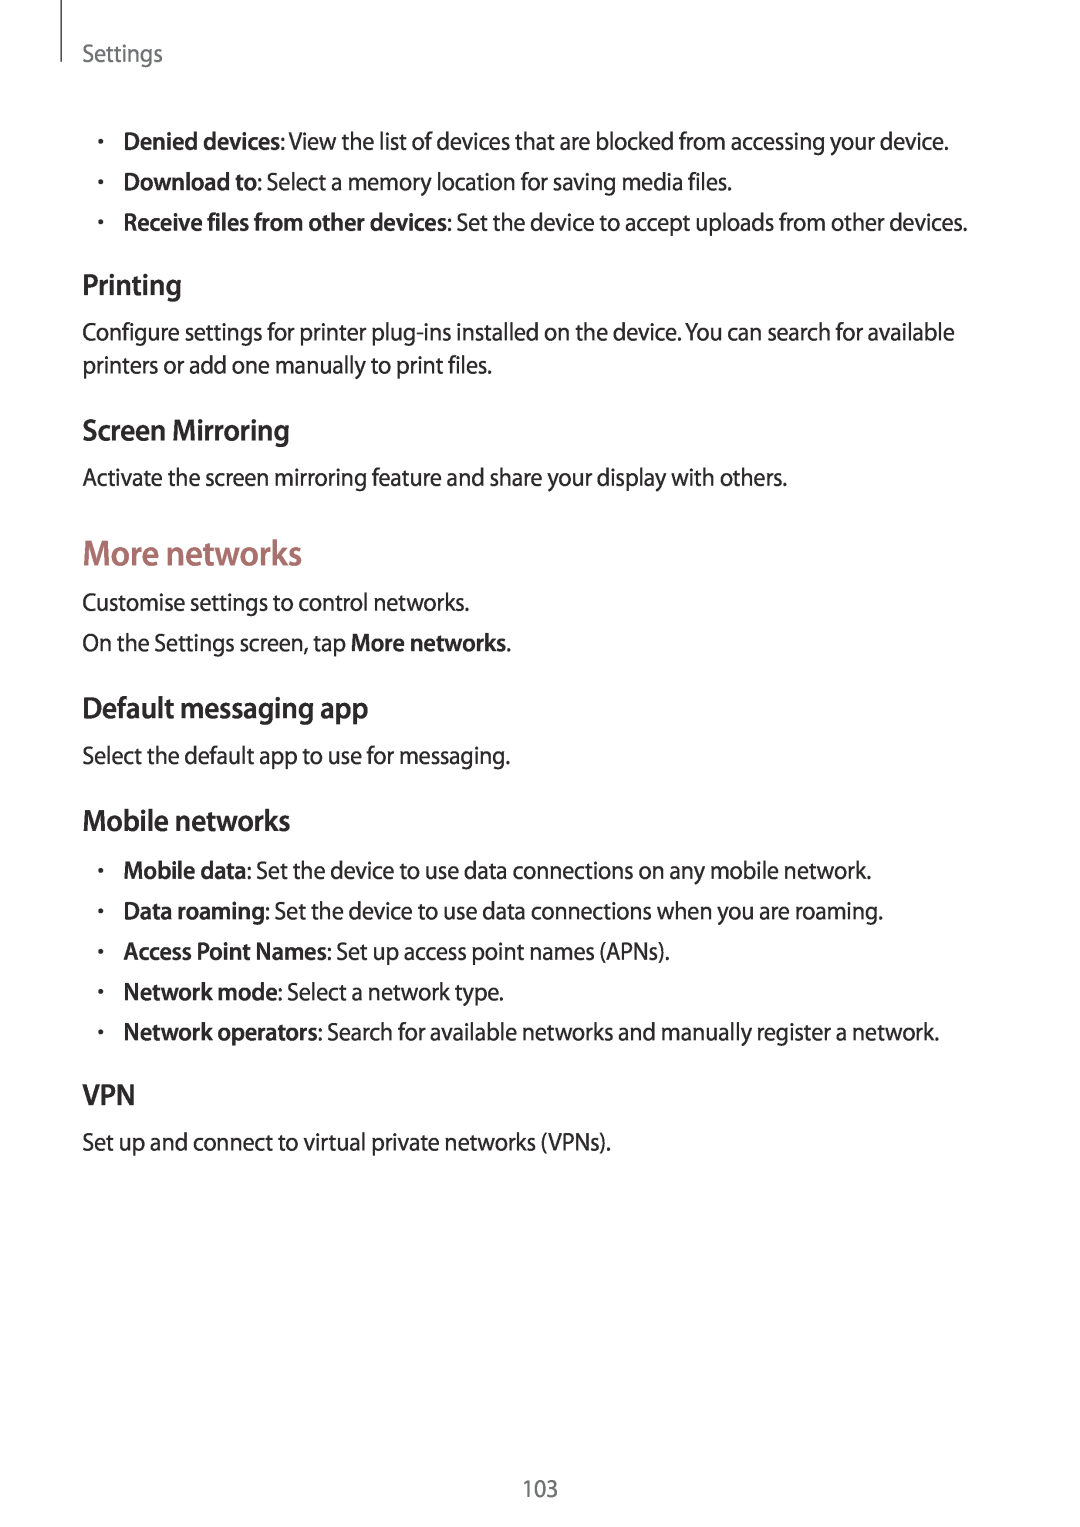 Samsung SM-A300FZSUSWC manual More networks, Printing, Screen Mirroring, Default messaging app, Mobile networks, Settings 